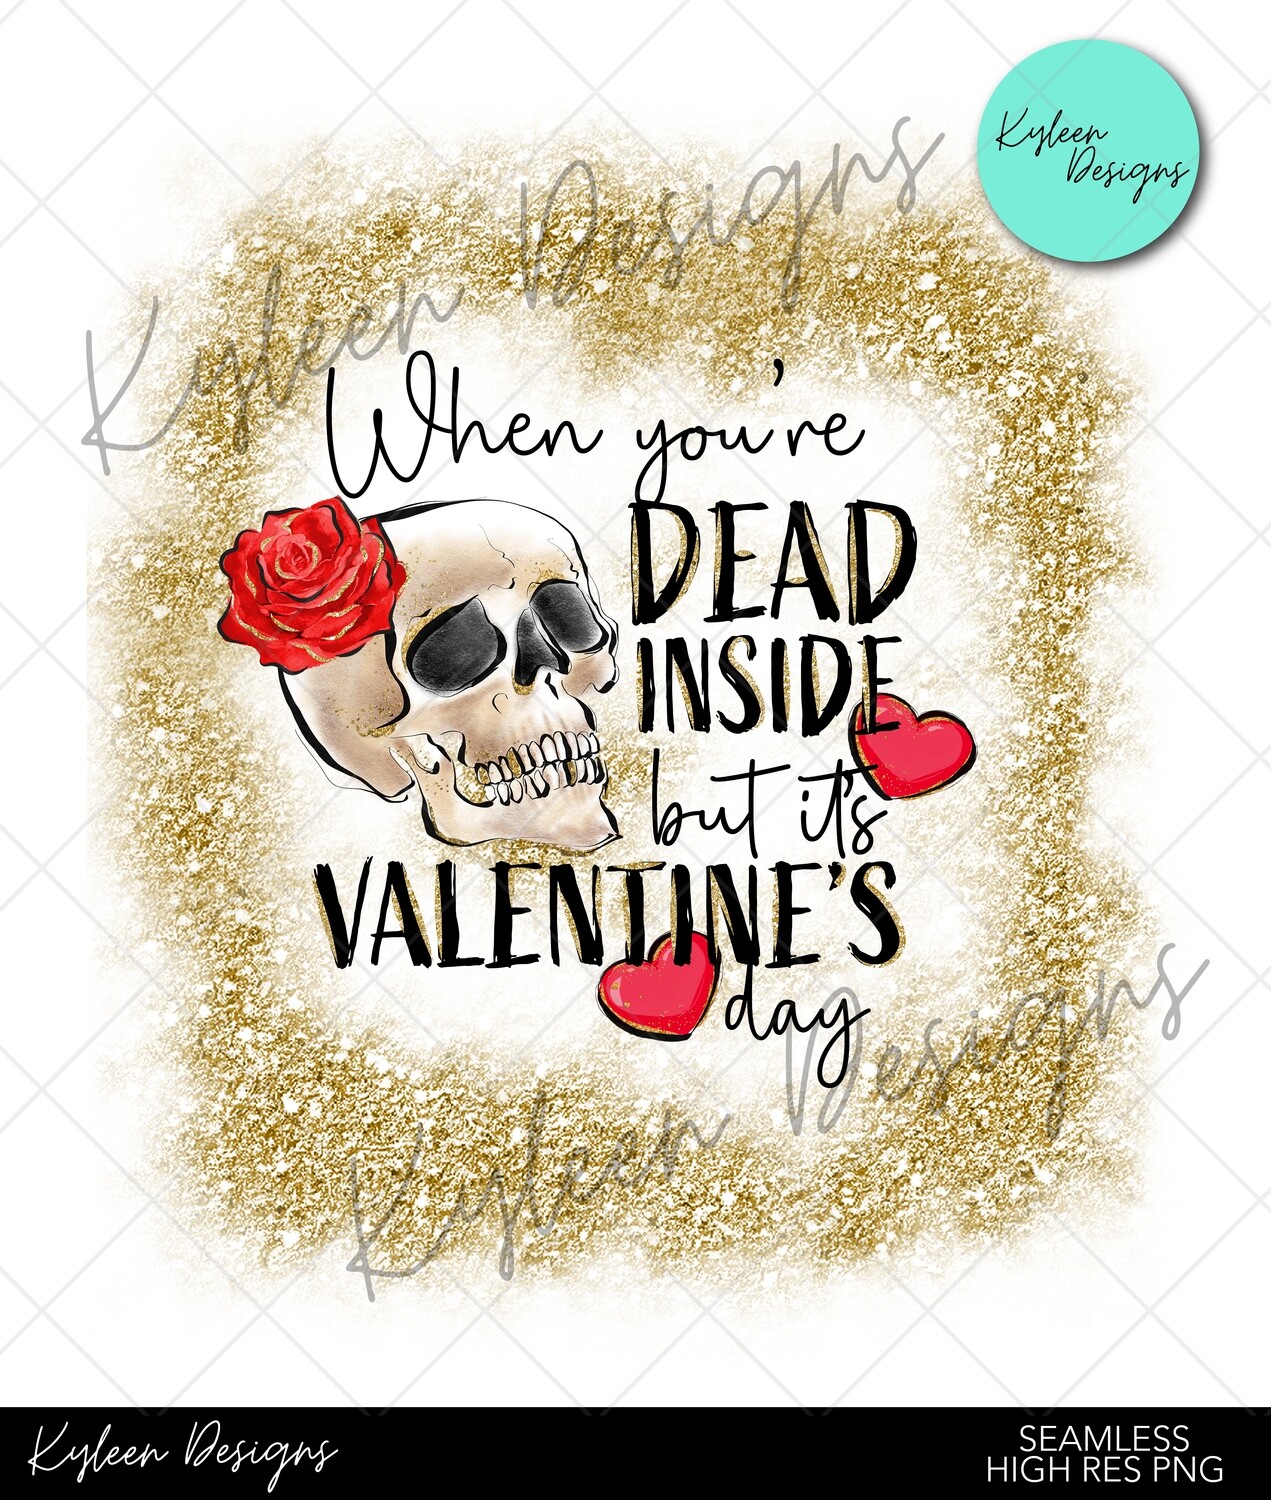 When you're dead inside and its valentines day sublimation, waterslide High res PNG digital file